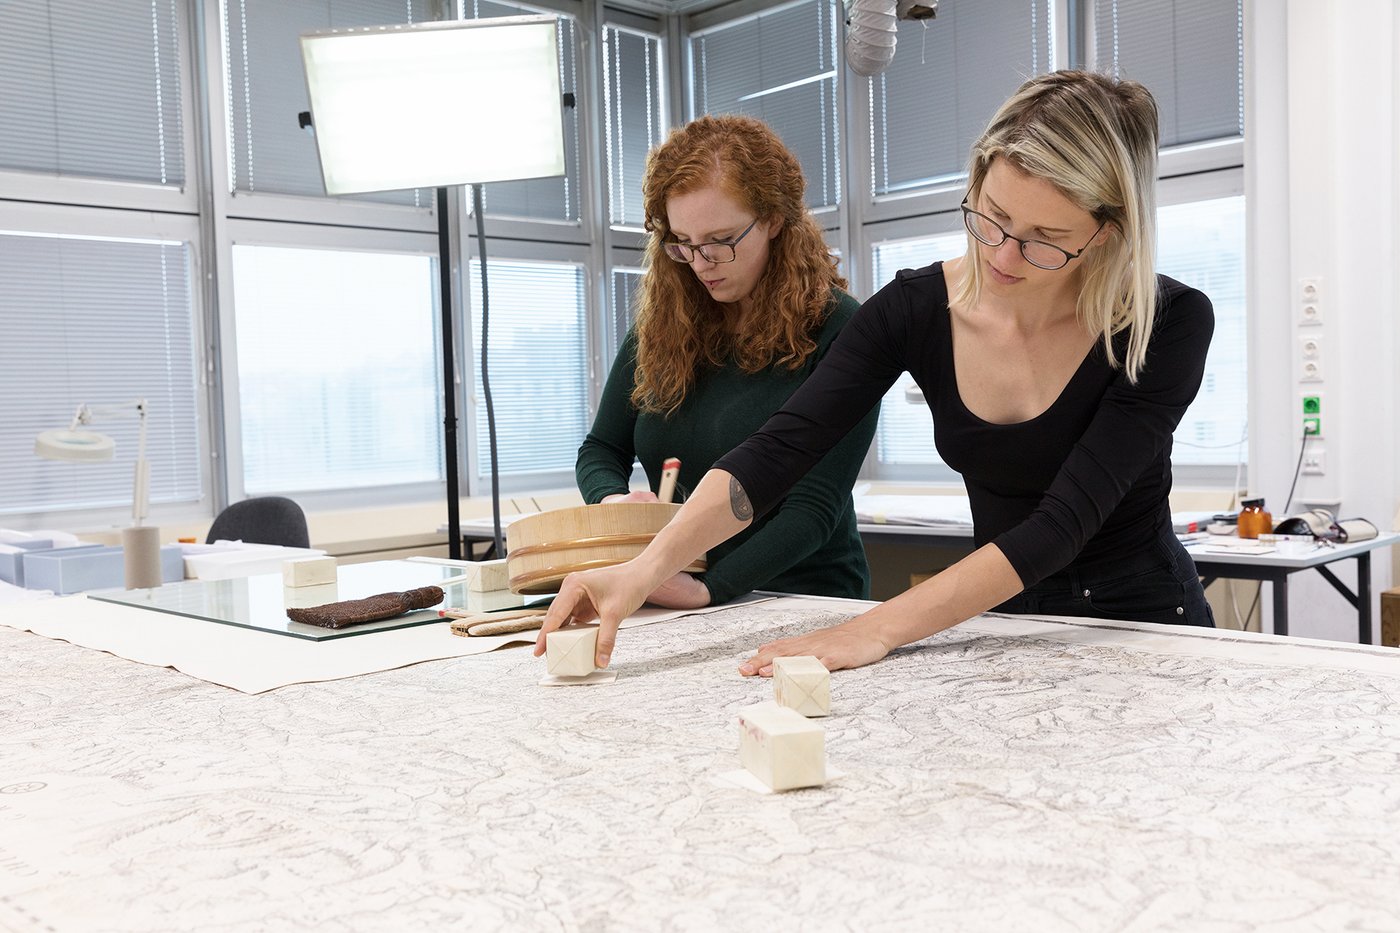 Two female students are working on a historical map lying on a large work table in the foreground of the picture. One student - standing behind the table on the left - is stirring the paste for the gluing in a container; the other - further to the right - is placing small cube-shaped weights on the glued crack areas.